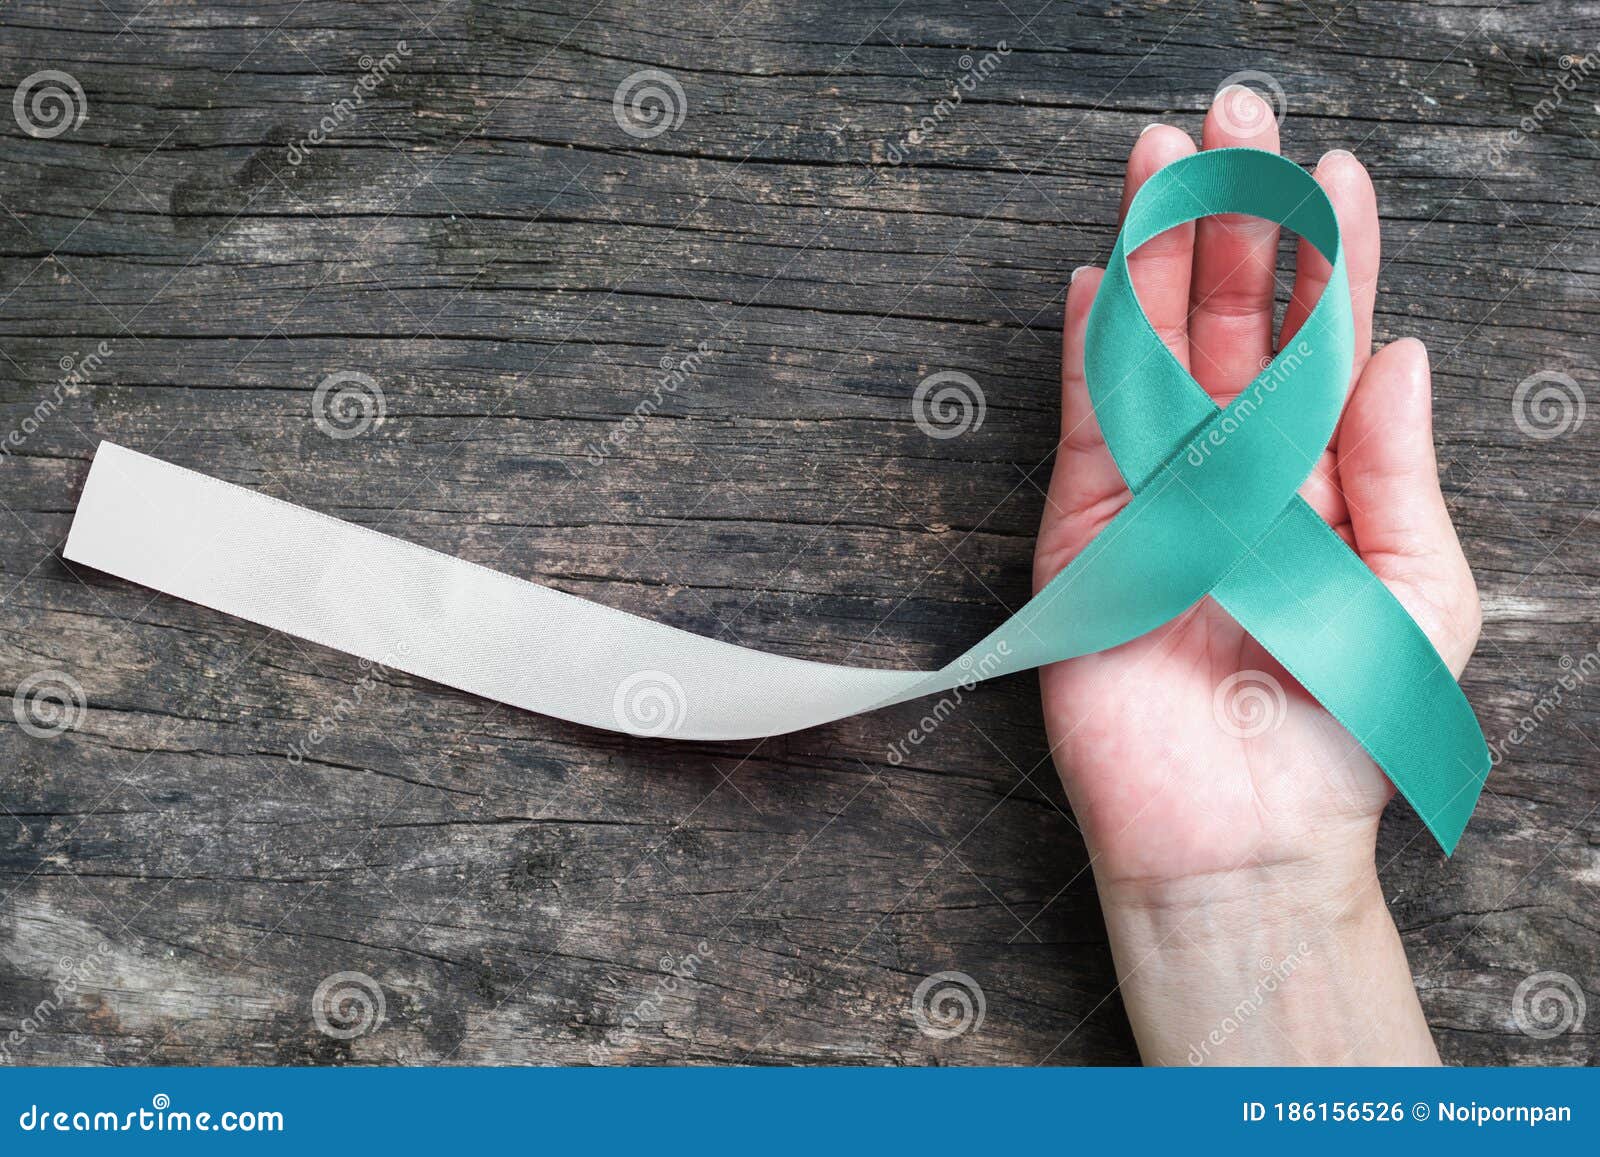 teal and white ribbon for cervical cancer awareness campaign concept ic bow color on woman helping hand support on old aged